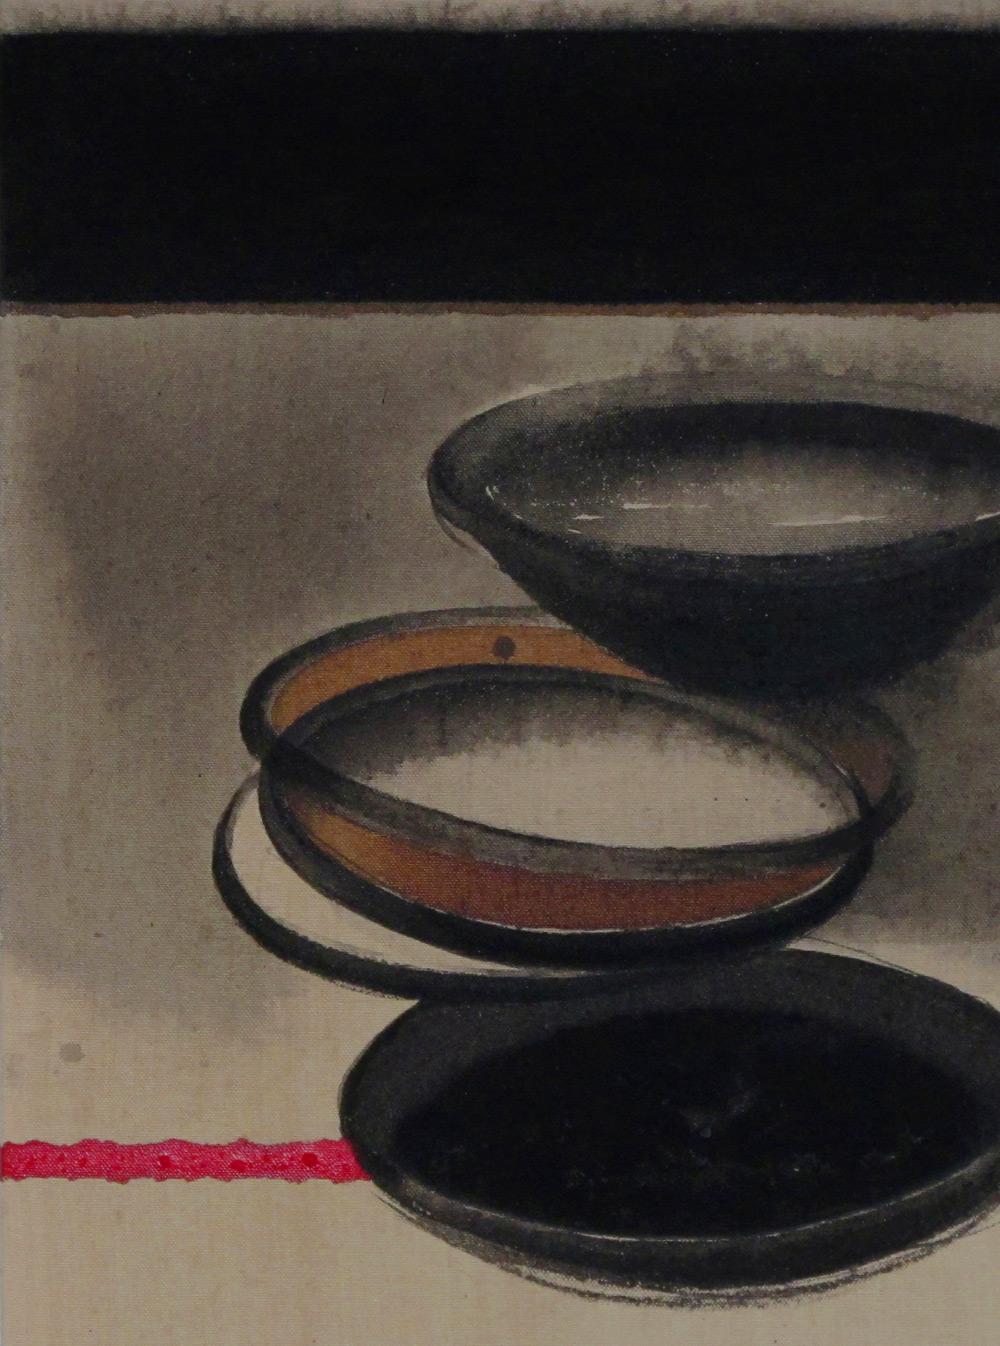 Madhu Basu  -  Magma n°247 -  25.75 X 21.25 inches (unframed size) 
Acrylic & Pigment on canvas
Inclusive of shipment in roll form.

Vessels and pots being of importance in Madhu Basu's works talk about the basic needs of everyday life. The need of